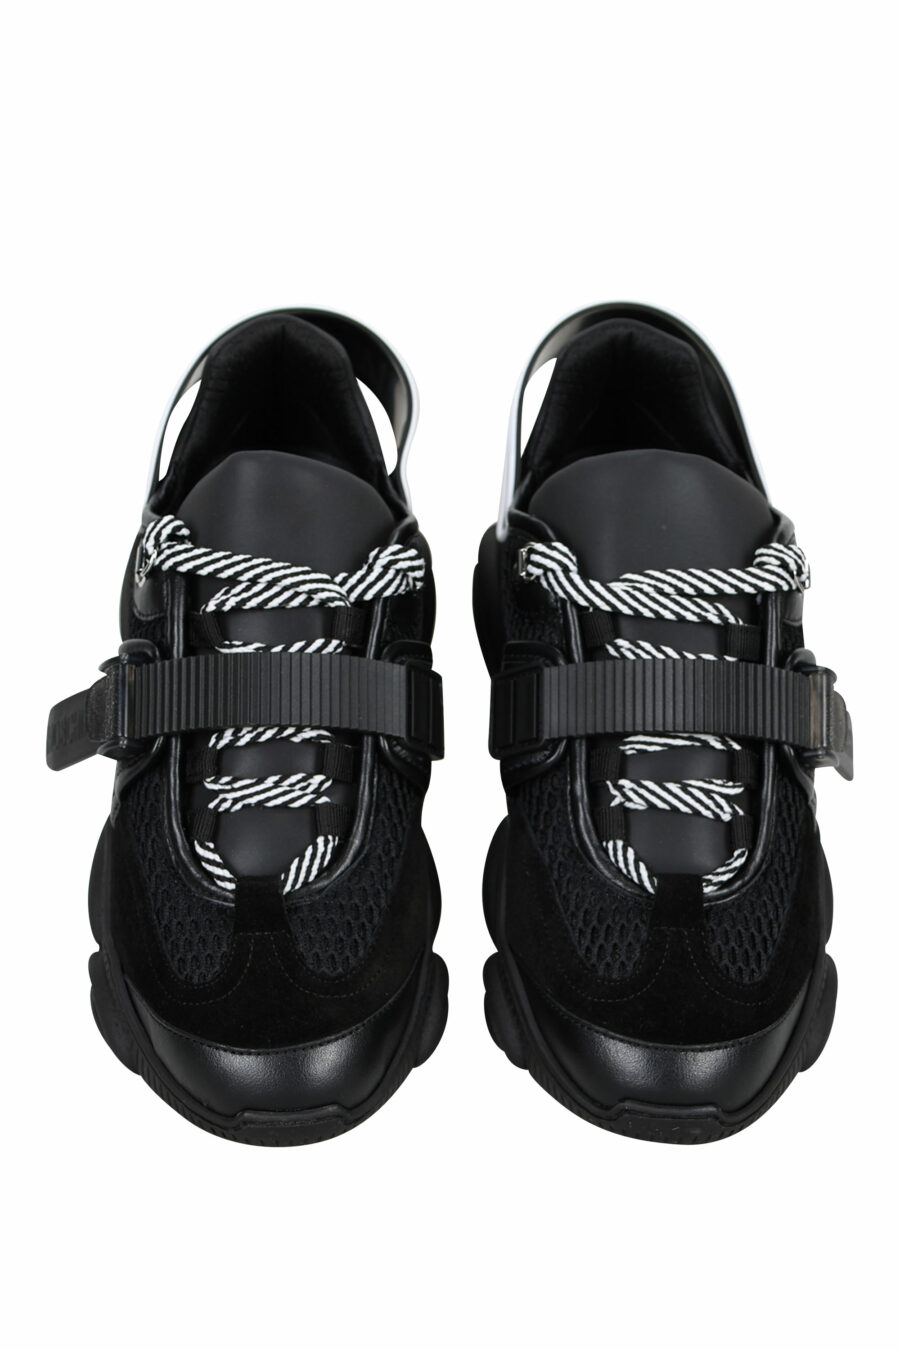 Black trainers with laces and velcro and rubber logo - 8054653226388 4